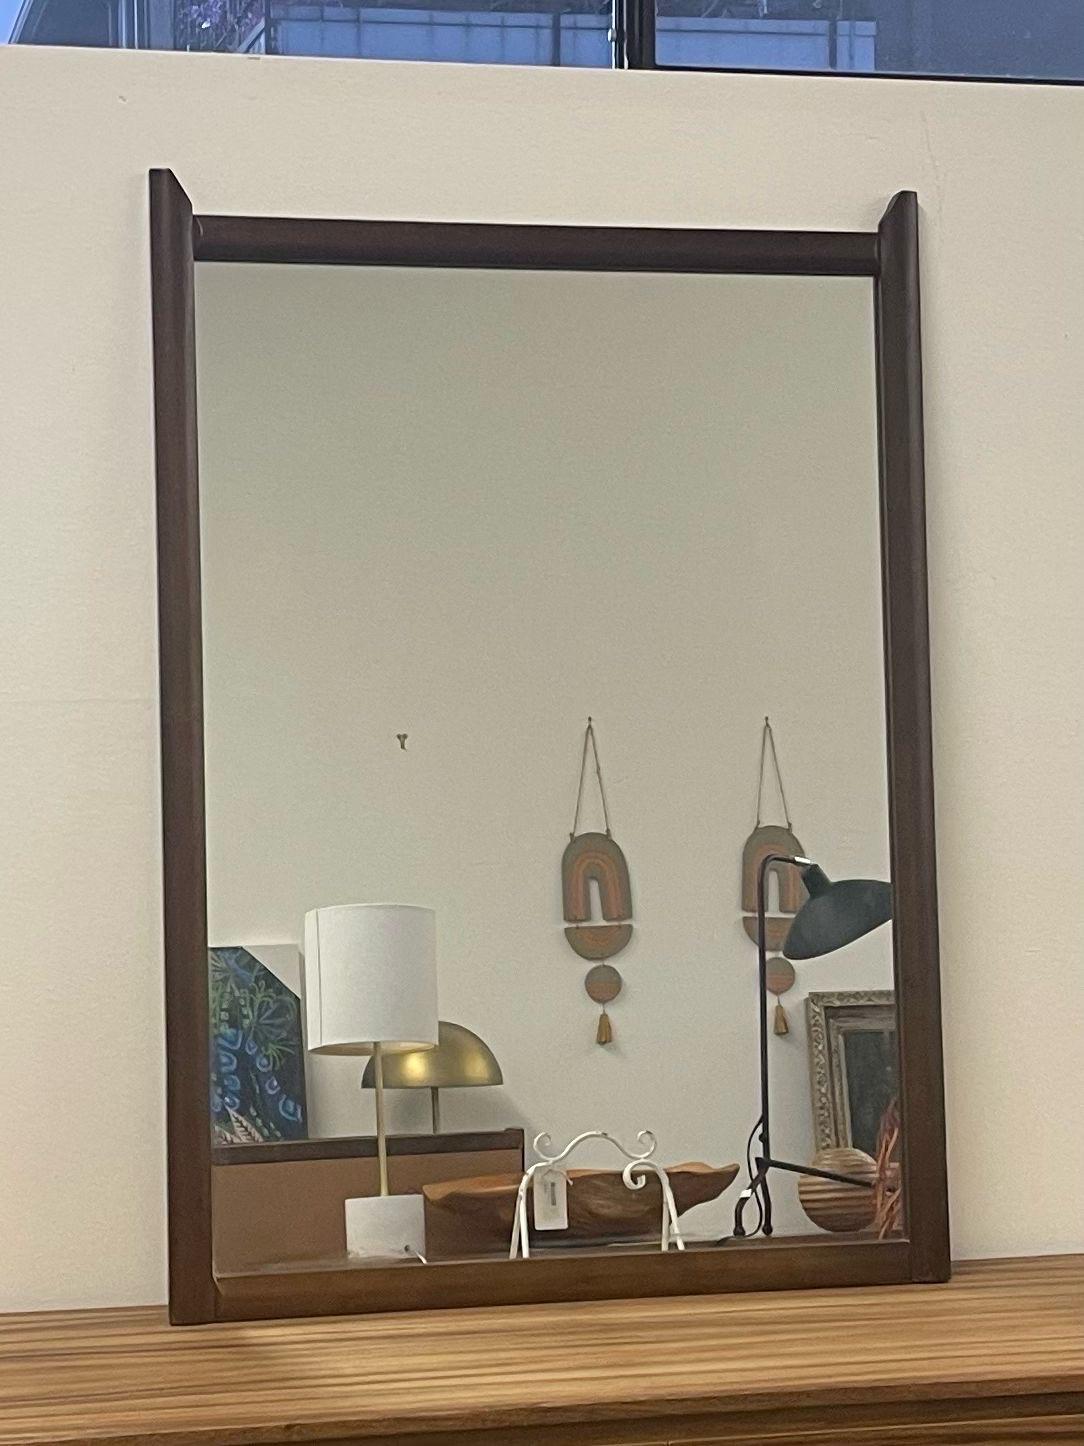 Mirror with Pointed Wood Edge. Vintage Condition Consistent with Age as Pictured.

Dimensions. 28 W ; 3/4 D ; 40 H